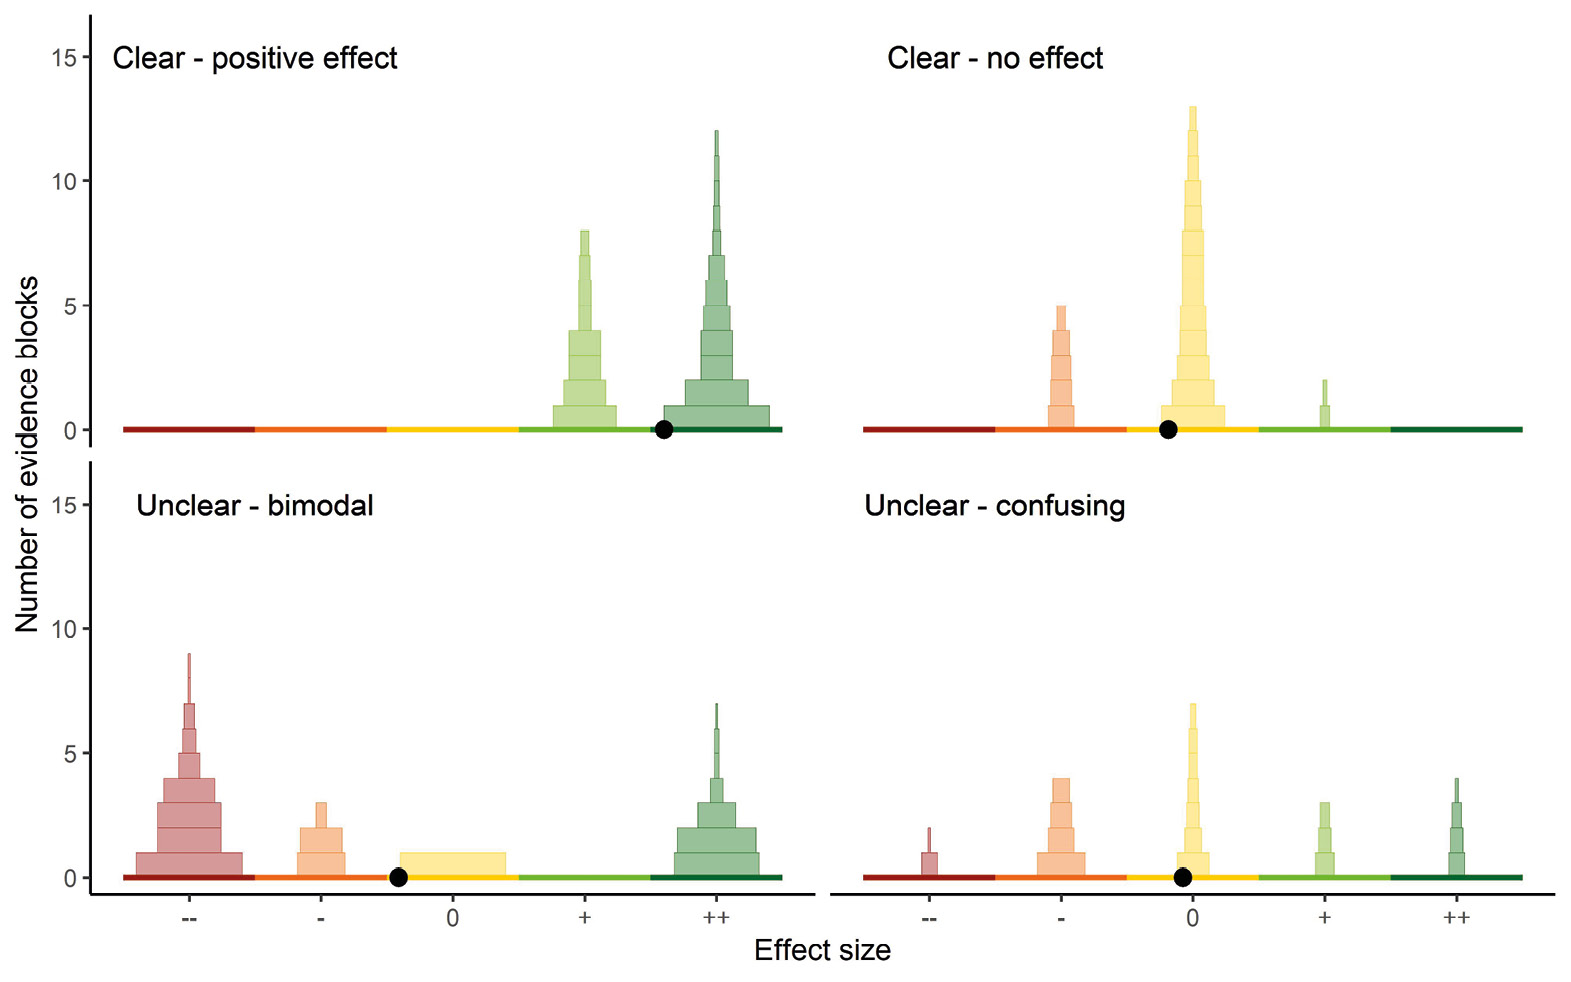 A graph showing 4 further ziggurat plots but where the overall strength of evidence supporting a claim varies from i) a clear positive effect, to ii) unclear or confusing.